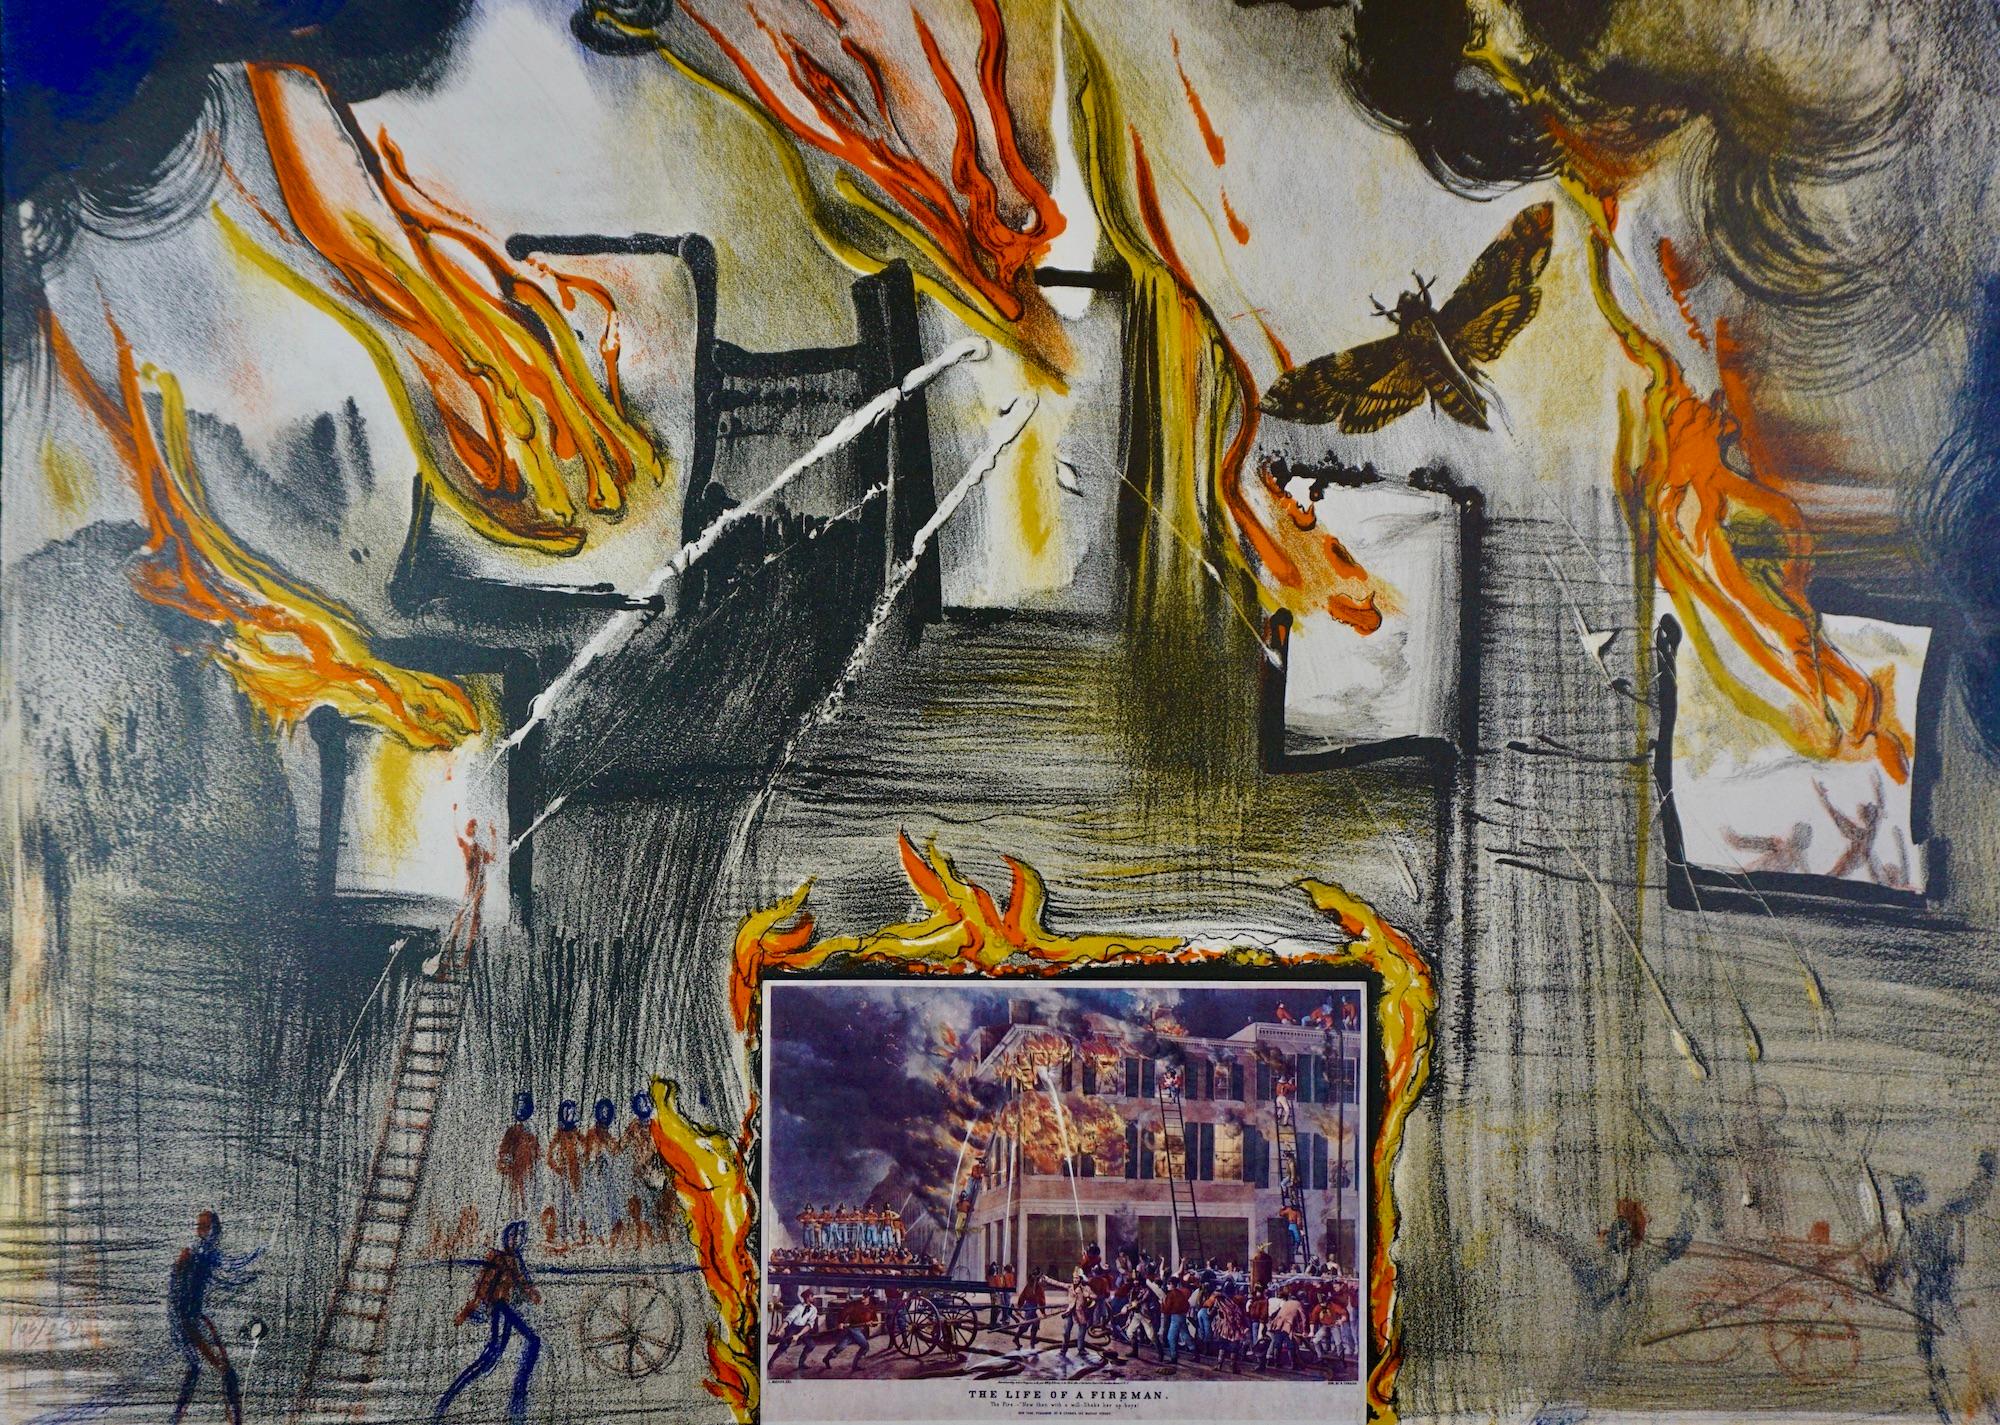 Currier & Ives Fire! Fire! Fire!  - Print by Salvador Dalí